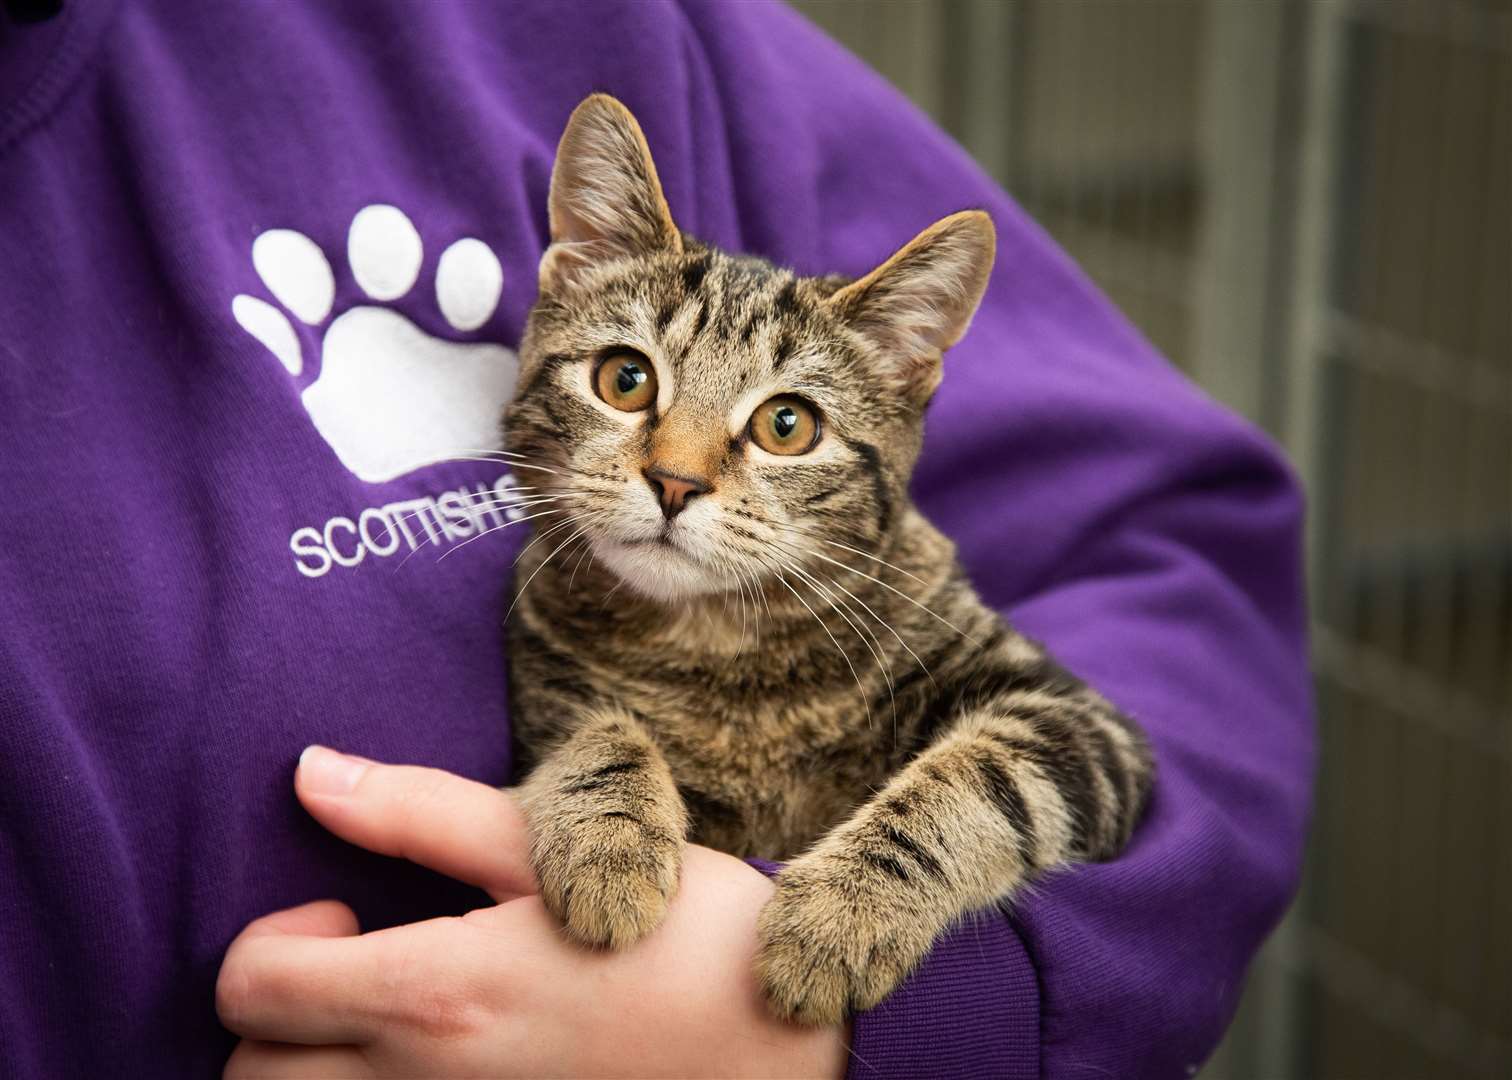 Scottish SPCA have seen a 151 per cent increase in calls from people looking to give up cats over the last four months compared to the same period the previous year.